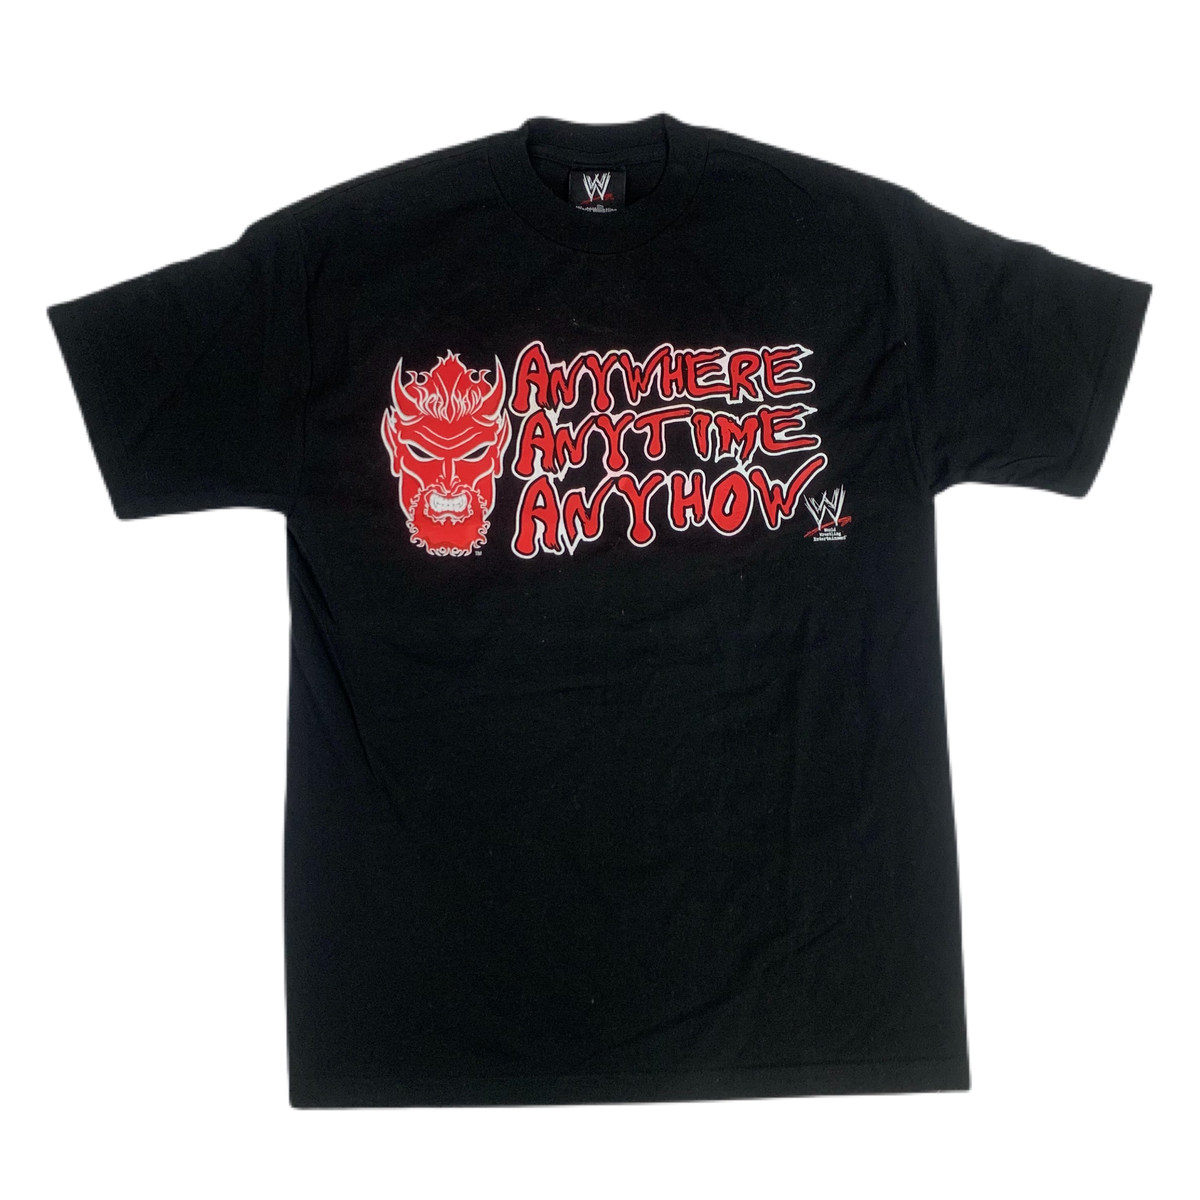 Vintage The Undertaker WWE &quot;Anywhere Anytime Anyhow&quot; T-Shirt